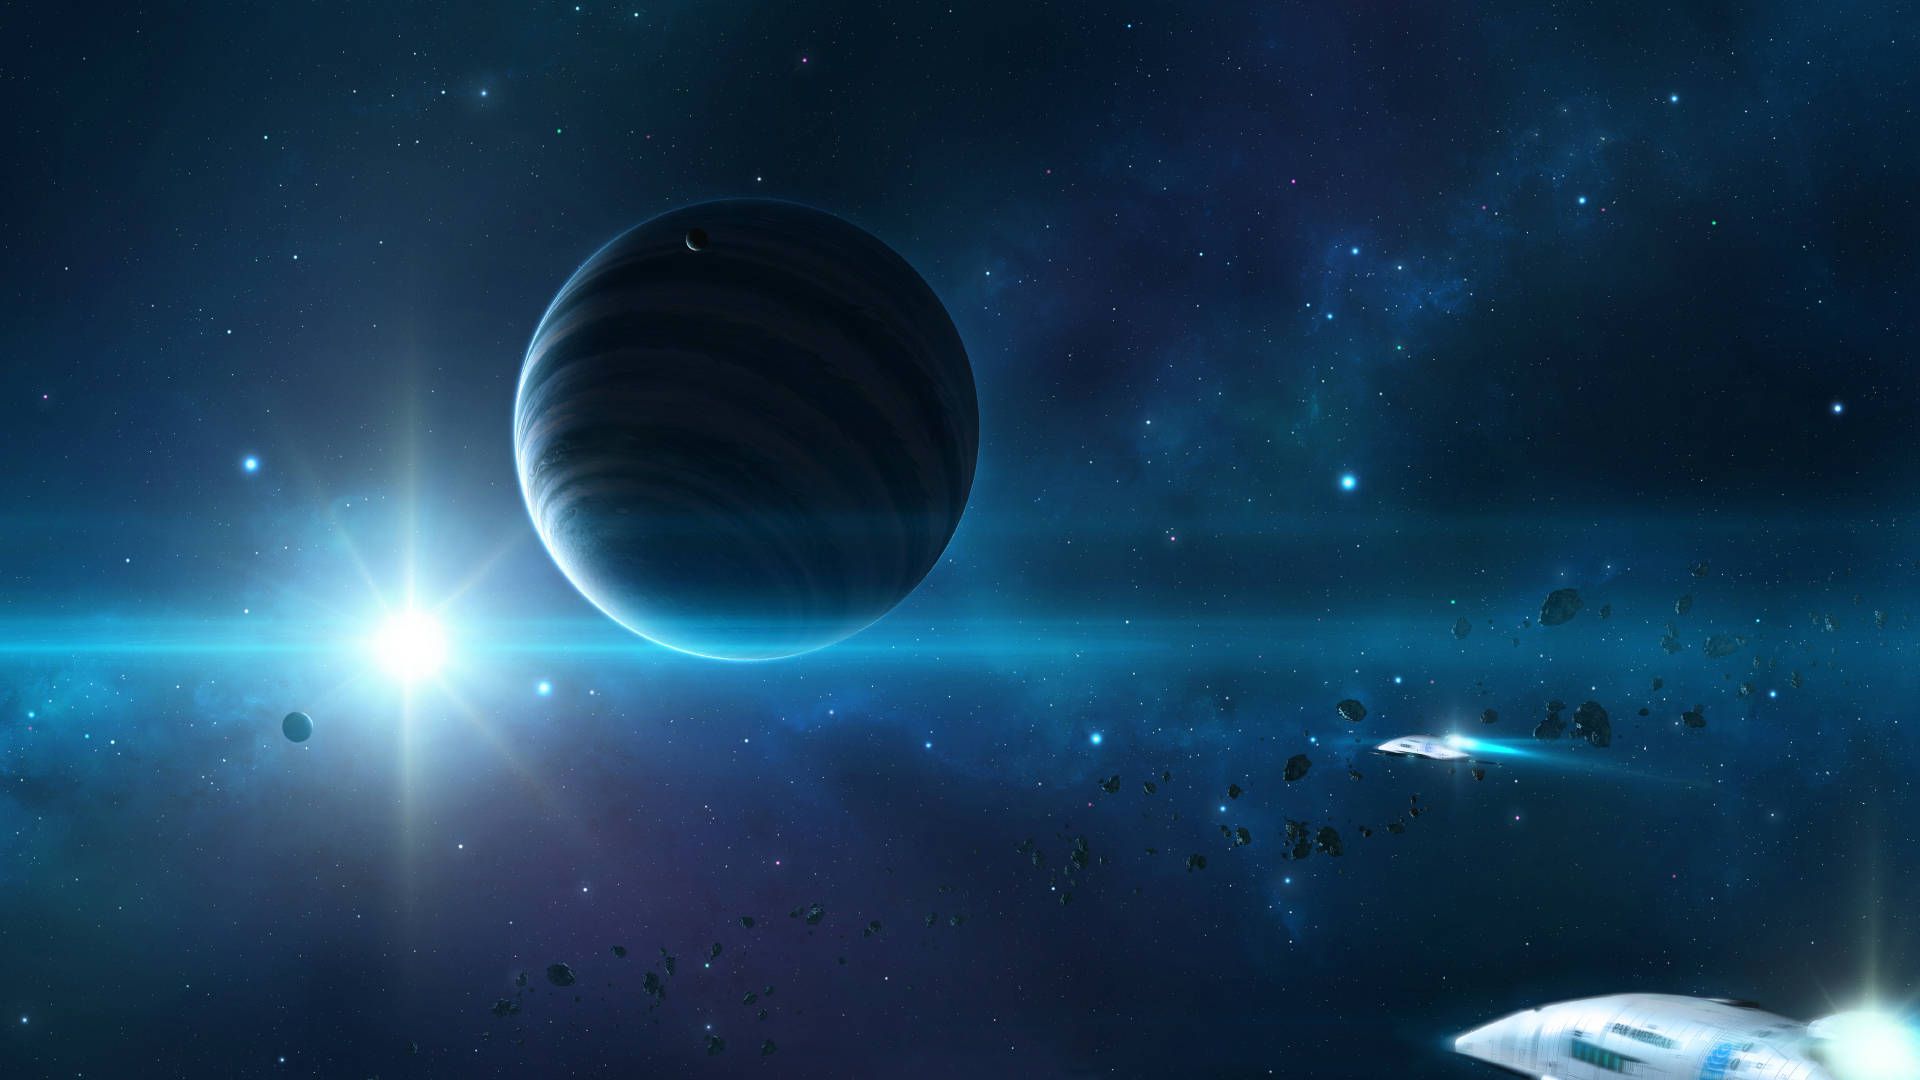 Outer Space Backgrounds HD 6512 1920x1080 px ~ WallpaperFort.com